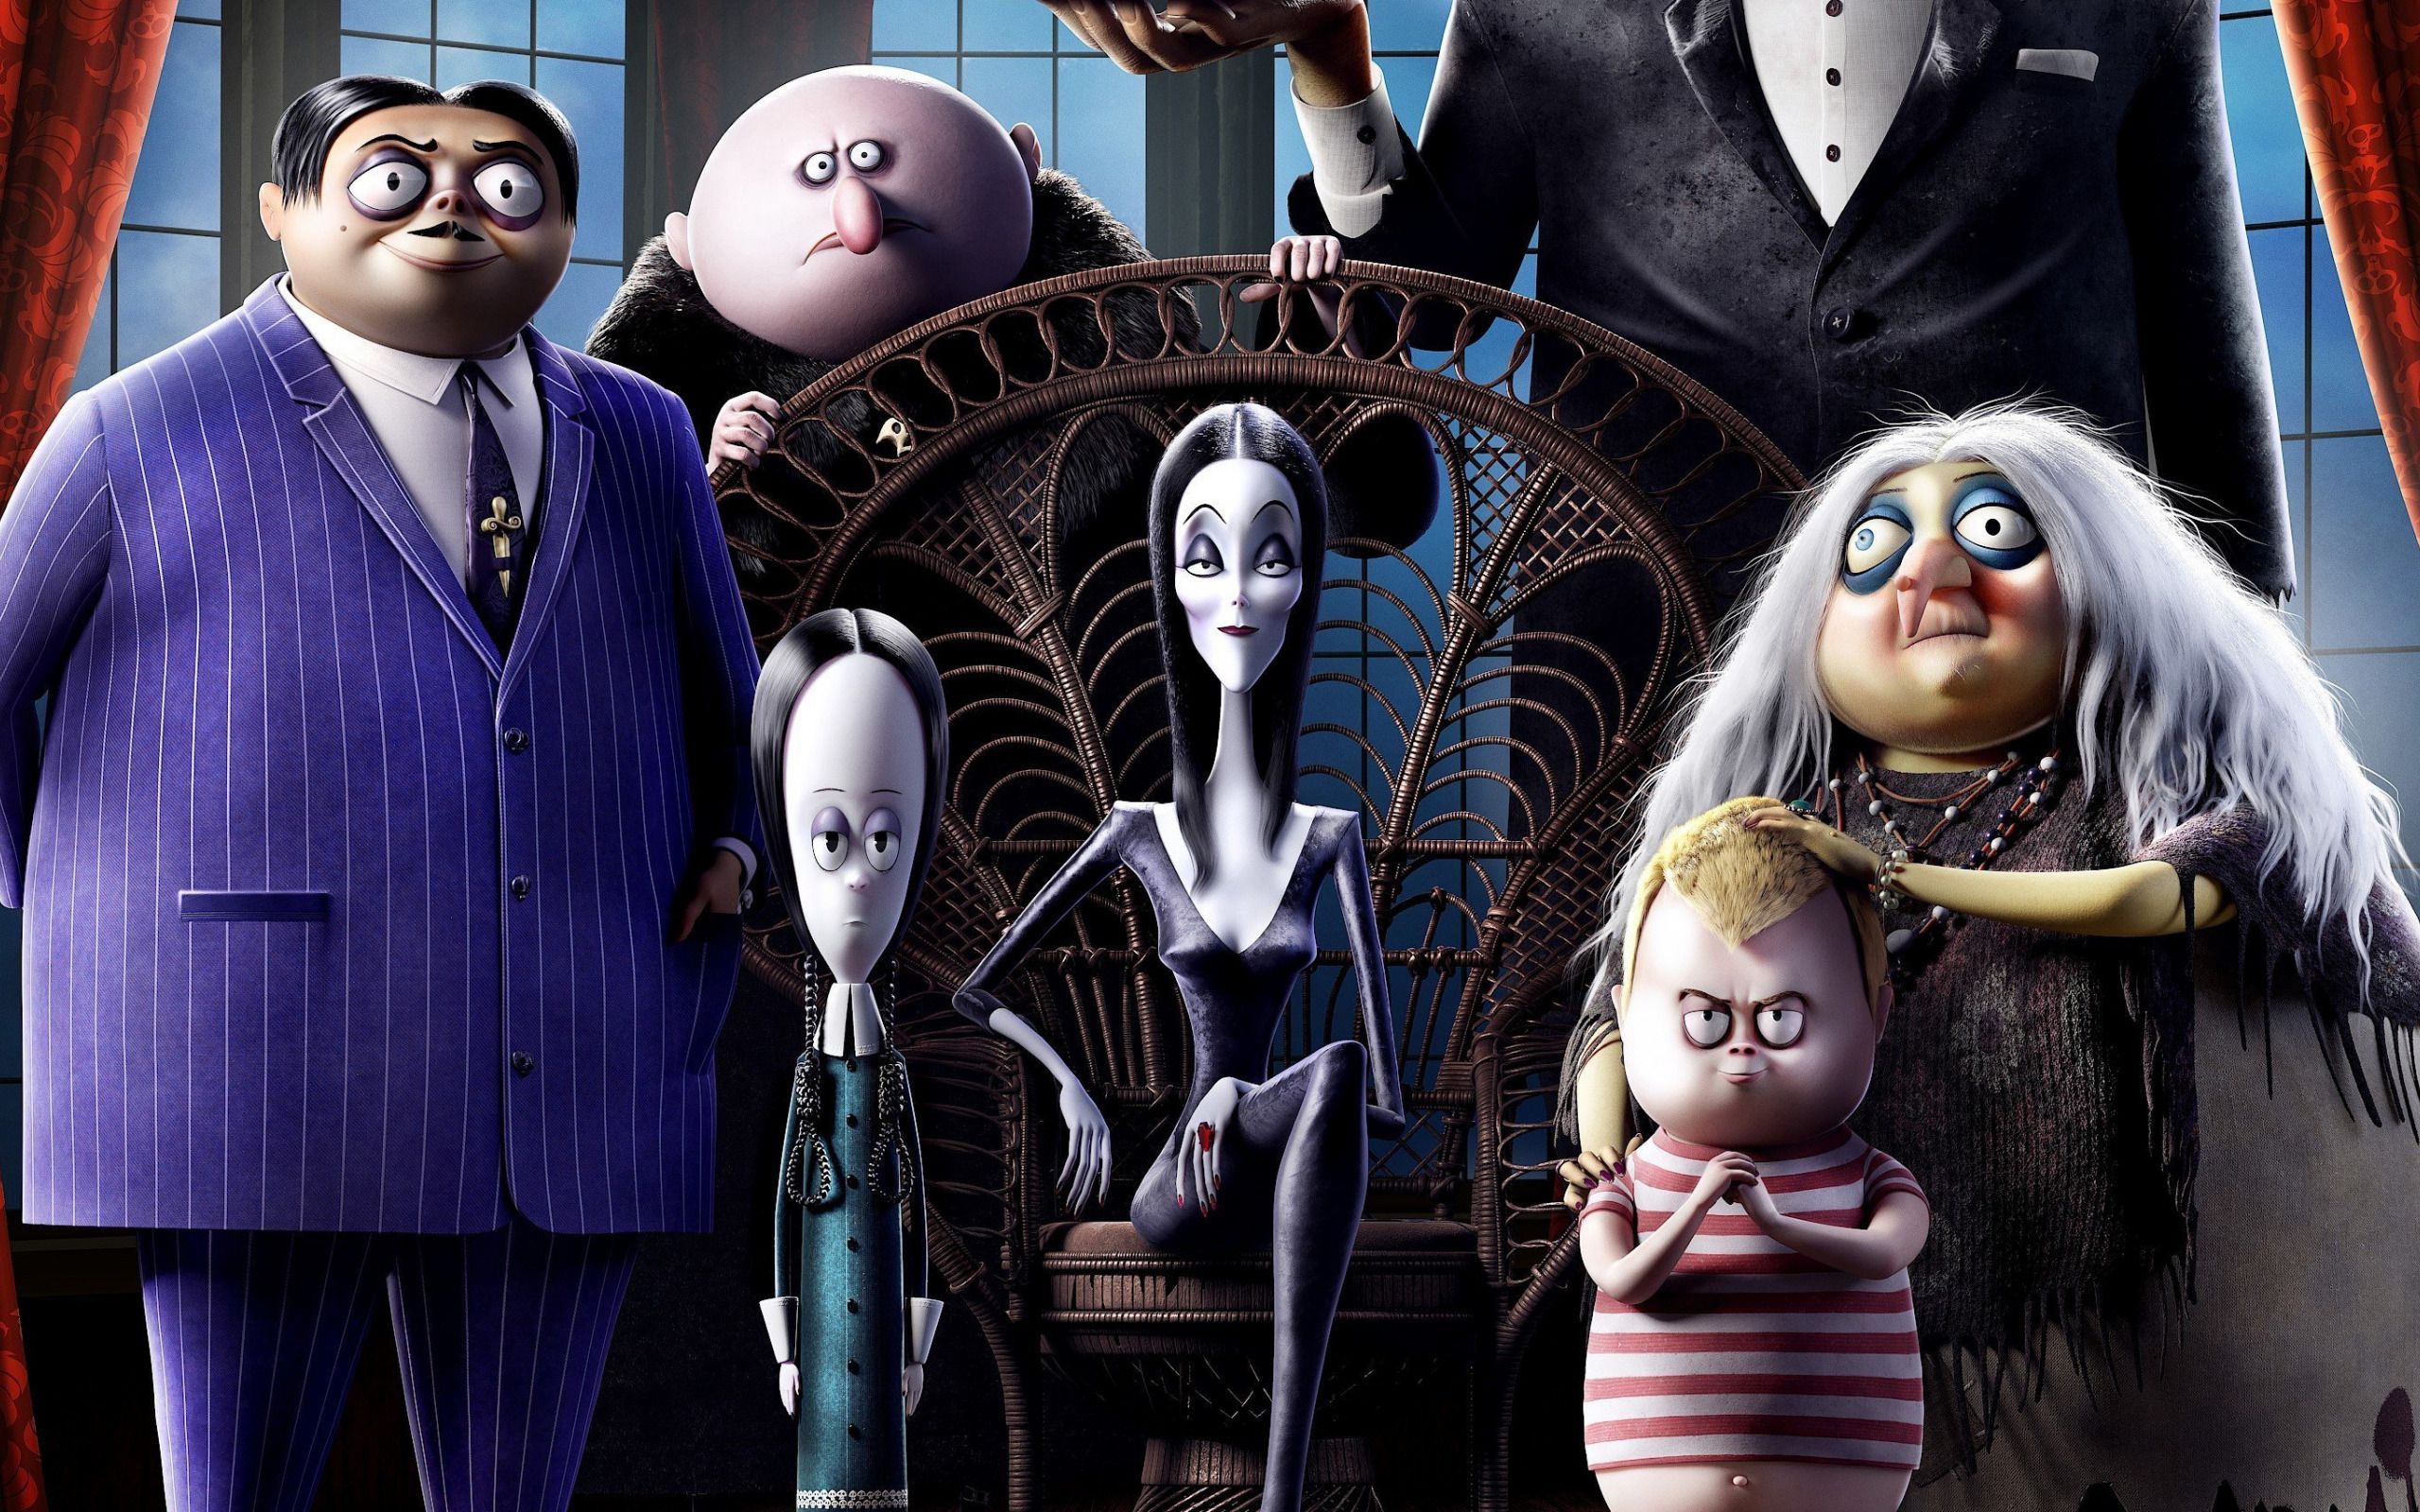 Download wallpaper The Addams Family, poster, promotional materials, all characters, Morticia Addams, Pugsley Addams, Wednesday Addams, Gomez Addams for desktop with resolution 2560x1600. High Quality HD picture wallpaper